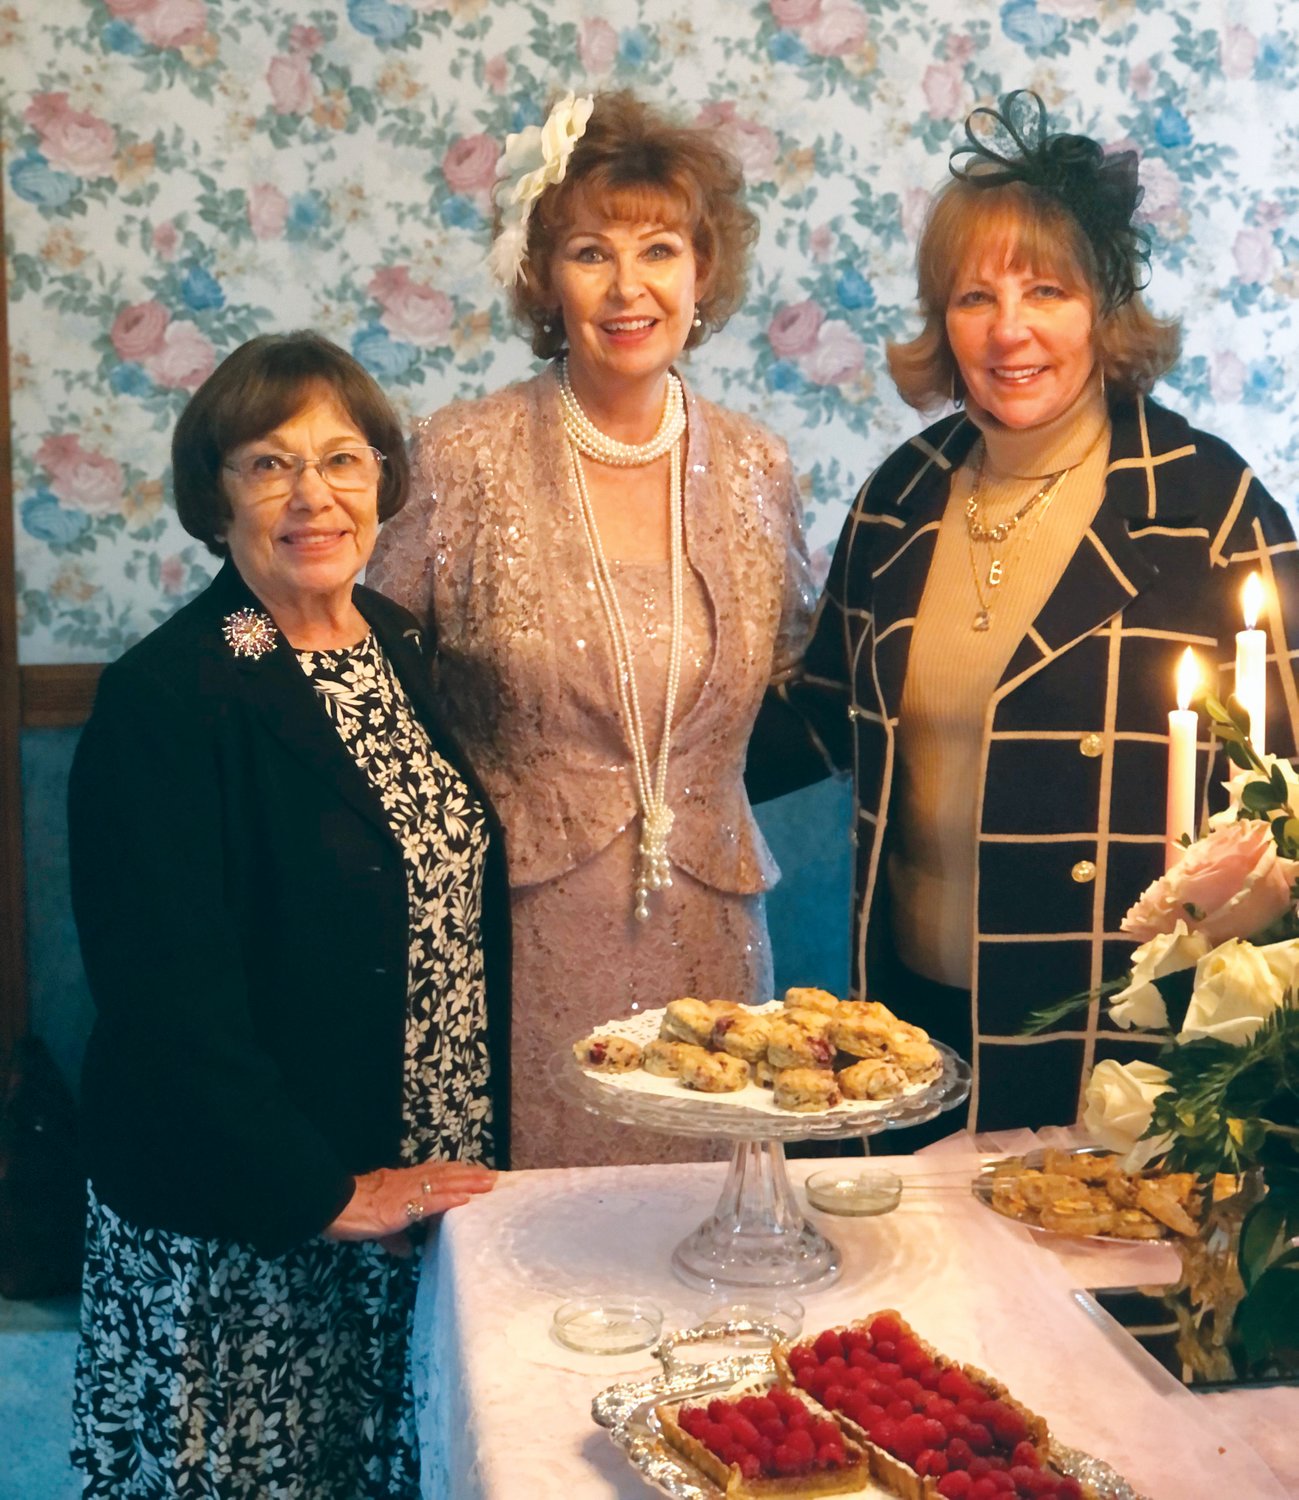 Local DAR members are, from left, treasurer Rachel Brown, Regent of Society Michelle Bolden and Vice Regent Susan Fisher during the chapter's 125th anniversary tea at the DAR house.